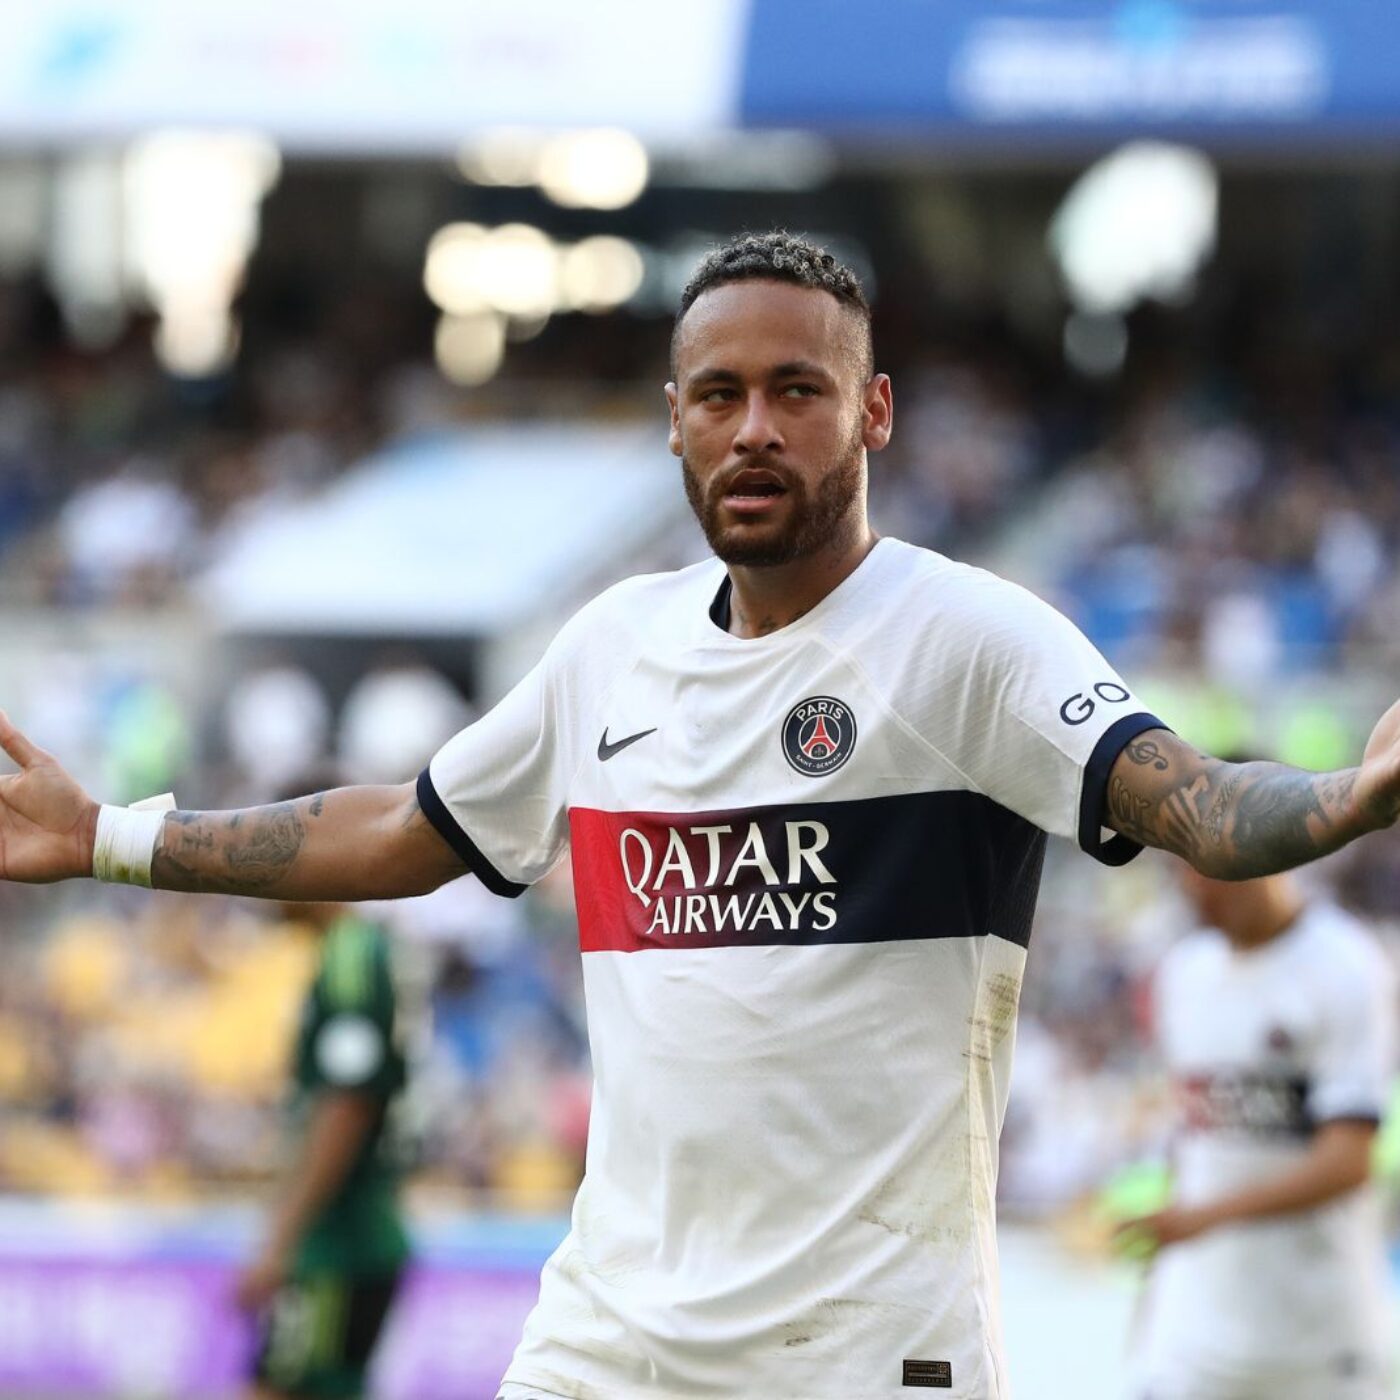 Why Did Neymar Leave PSG for Saudi Arabia? — Here’s the Latest